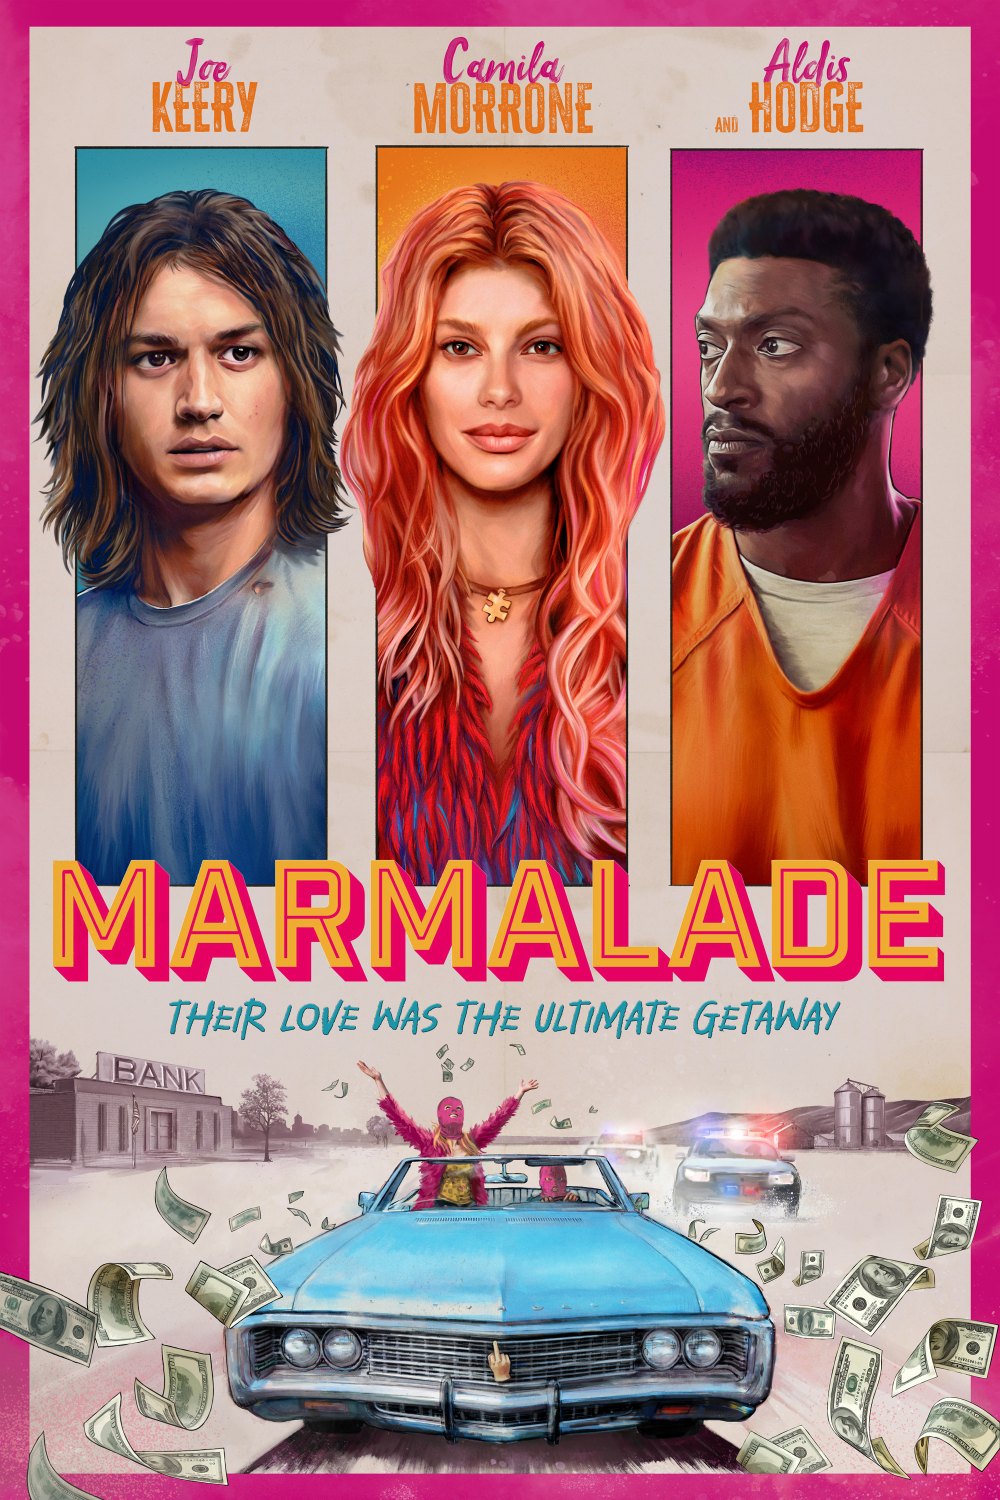 Joe Keery and Camila Morrone s Bonnie and Clyde Inspired Romance Takes Center Stage in Marmalade